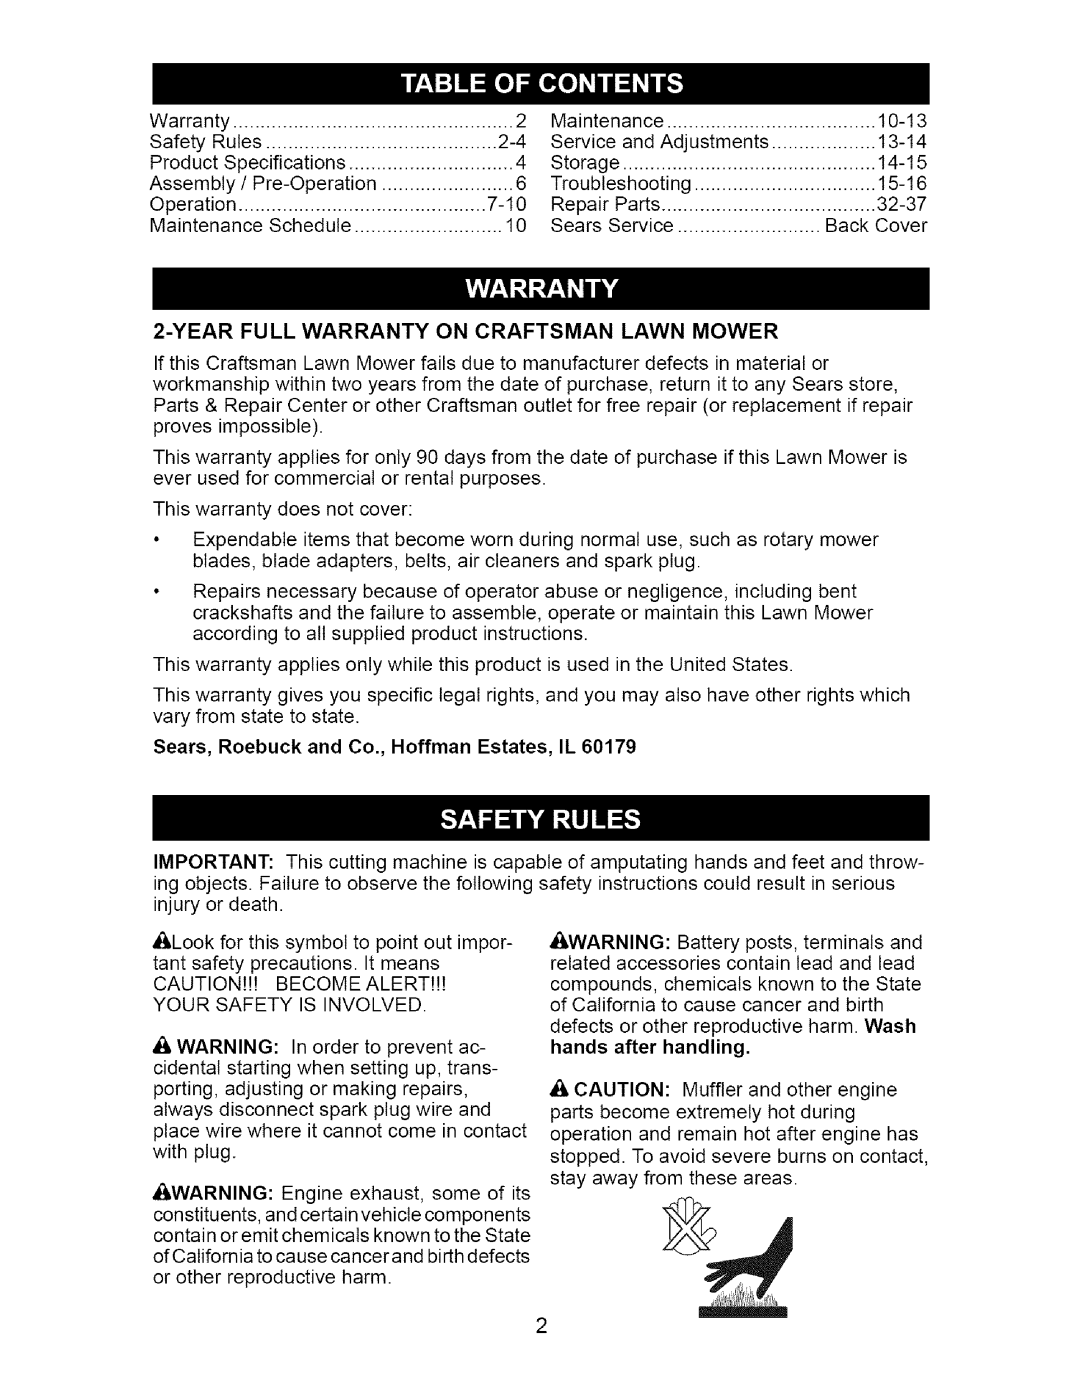 Craftsman 917.37134 owner manual Yearfull Warranty On Craftsman Lawn Mower, Sears, Roebuck and Co., Hoffman Estates, IL 